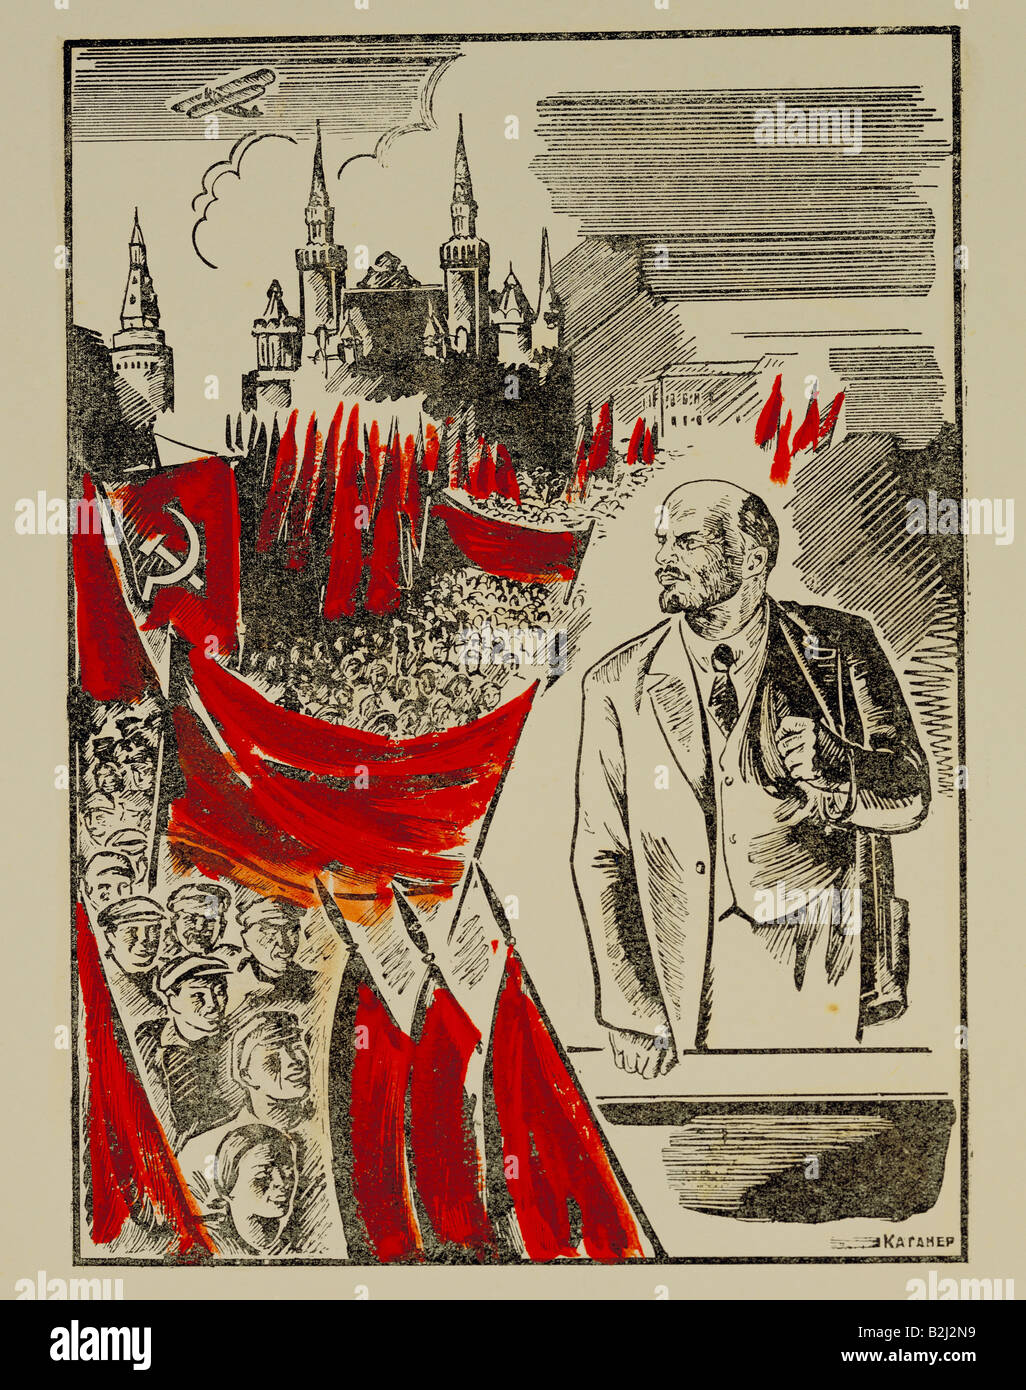 Lenin (Vladimir Ilyich Ulyanov), 22.4.1870 - 21.1.1924, Russian politician, Chairman of the Council of Peoples Commissars 26.10.1917 - 21.7.1924, half length, illustration, USSR, circa 1928, private collection, Stock Photo